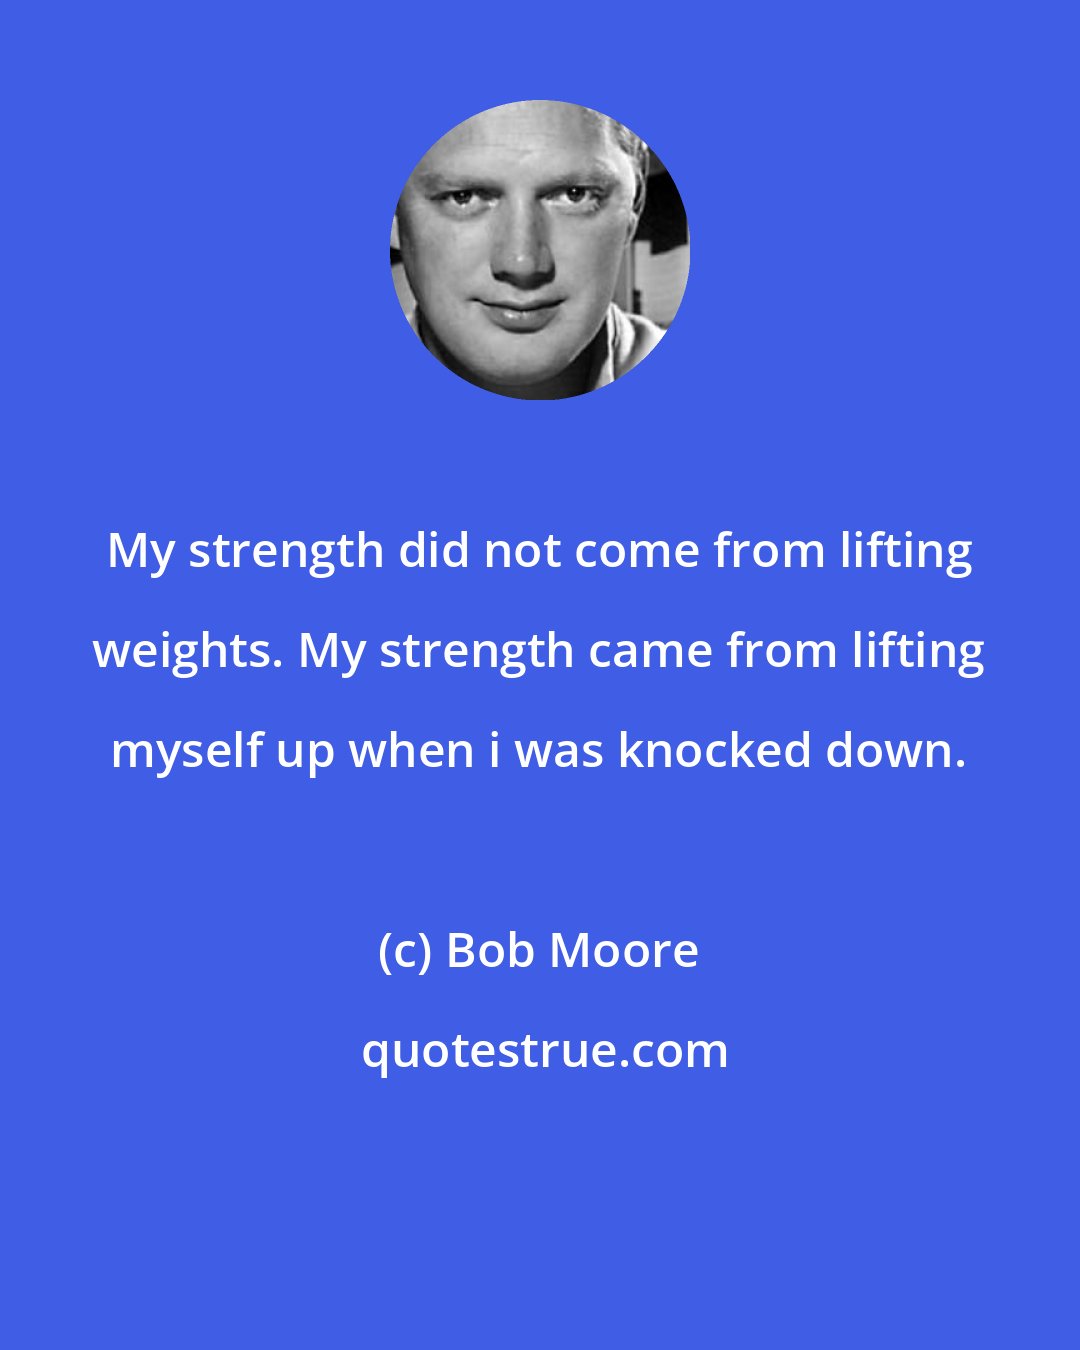 Bob Moore: My strength did not come from lifting weights. My strength came from lifting myself up when i was knocked down.